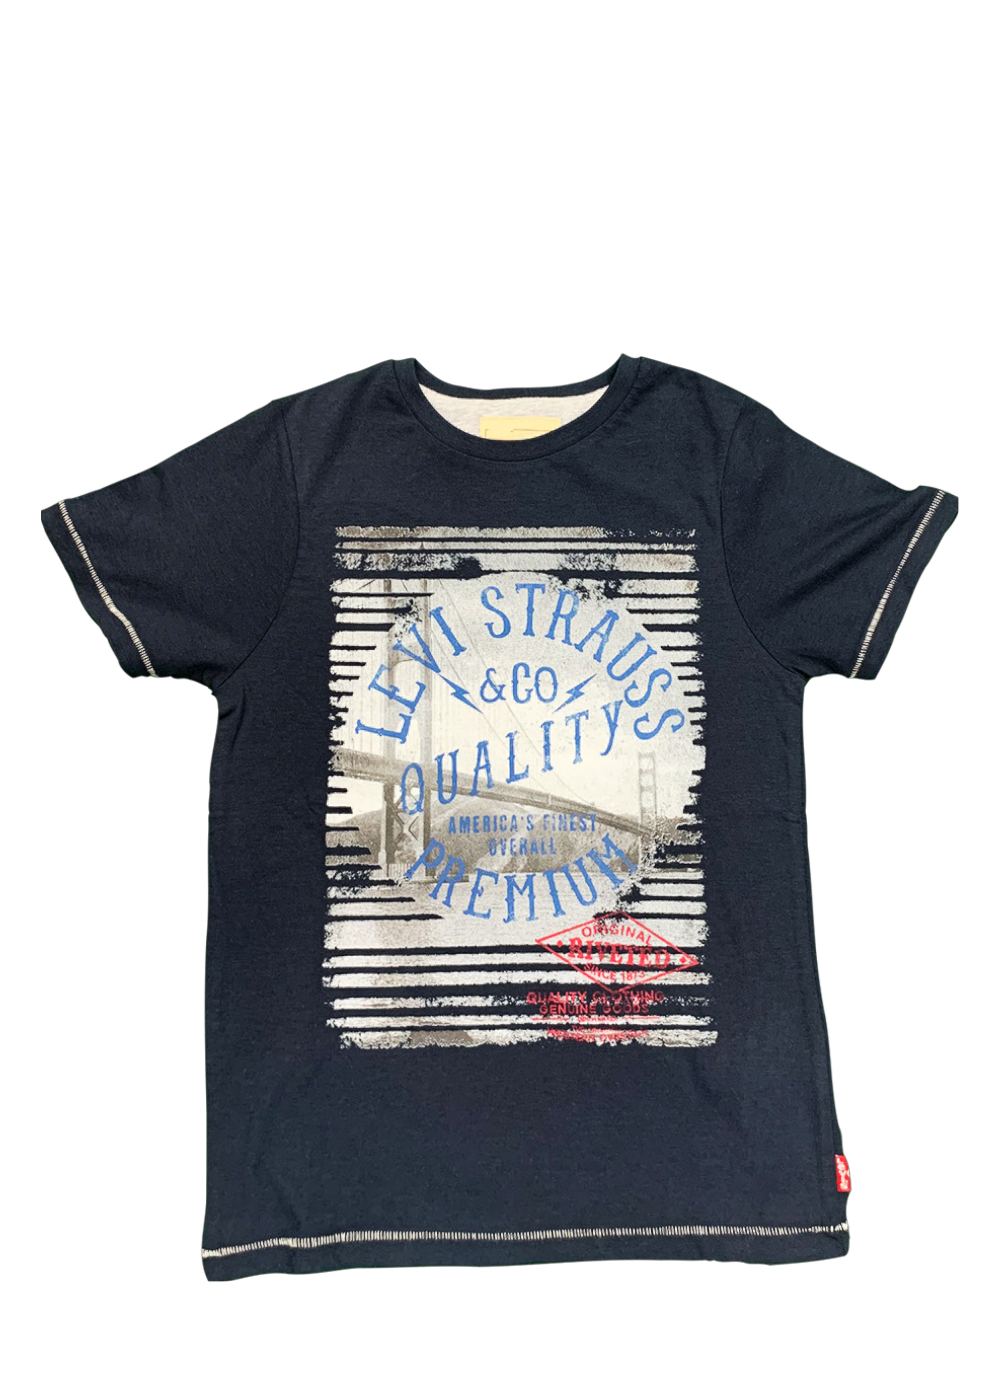 Featured image for “LEVI'S T-SHIRT STAMPA”